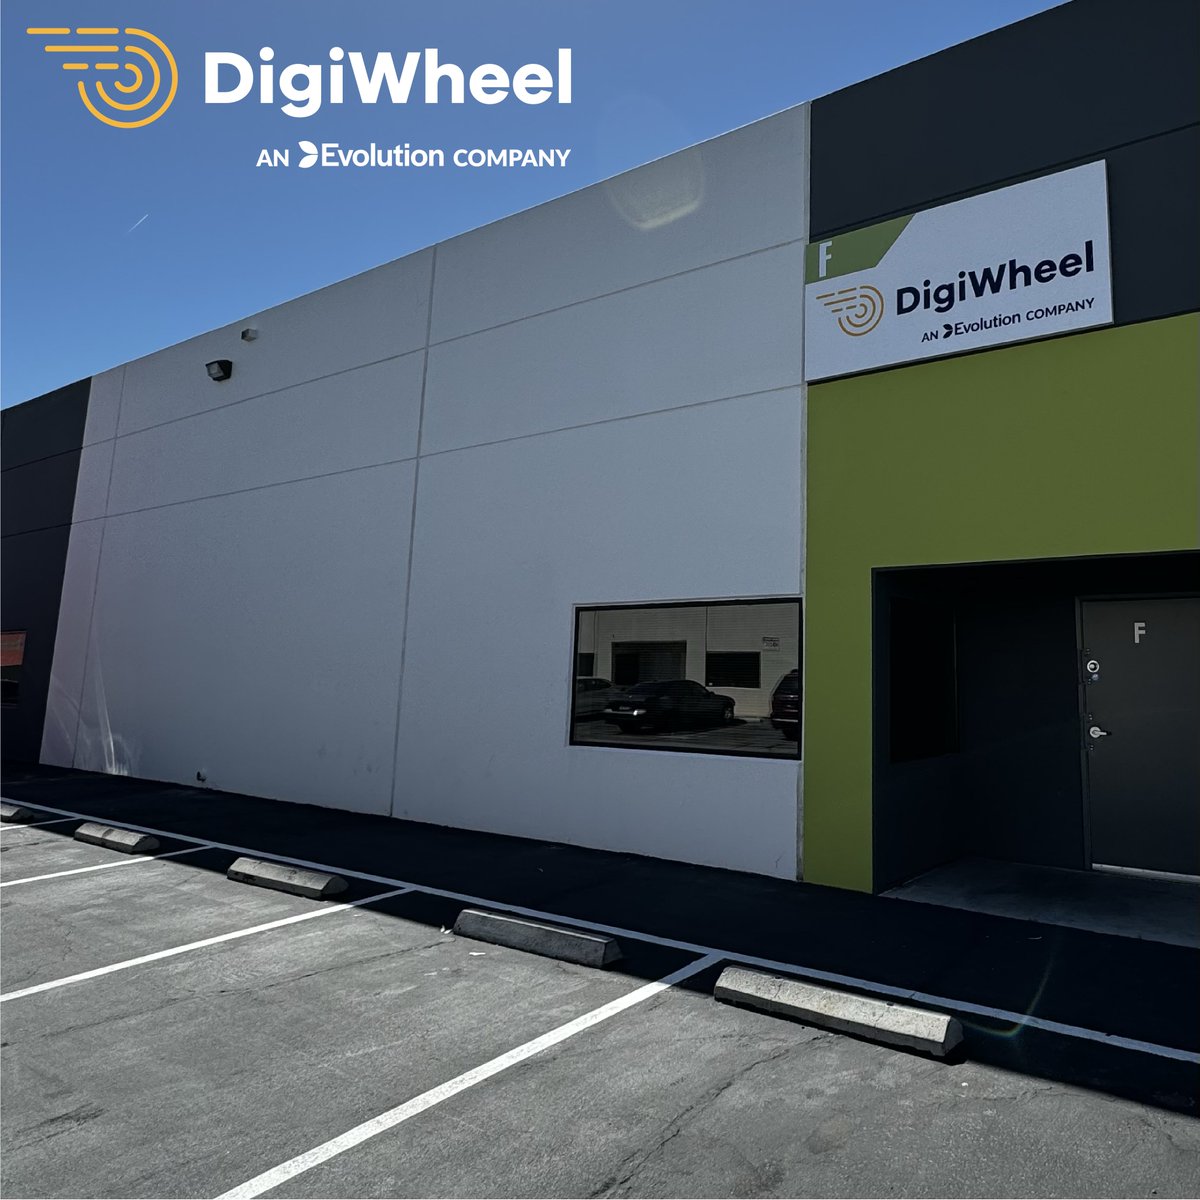 Las Vegas, Nevada! Our second home here in DigiWheel. This staging facility is used to service our clients in both Canada & USA along with providing a showroom for prospective clients to come and play with our products! 🎰🎡

#DigiWheel #GetToKnowUs #LasVegas